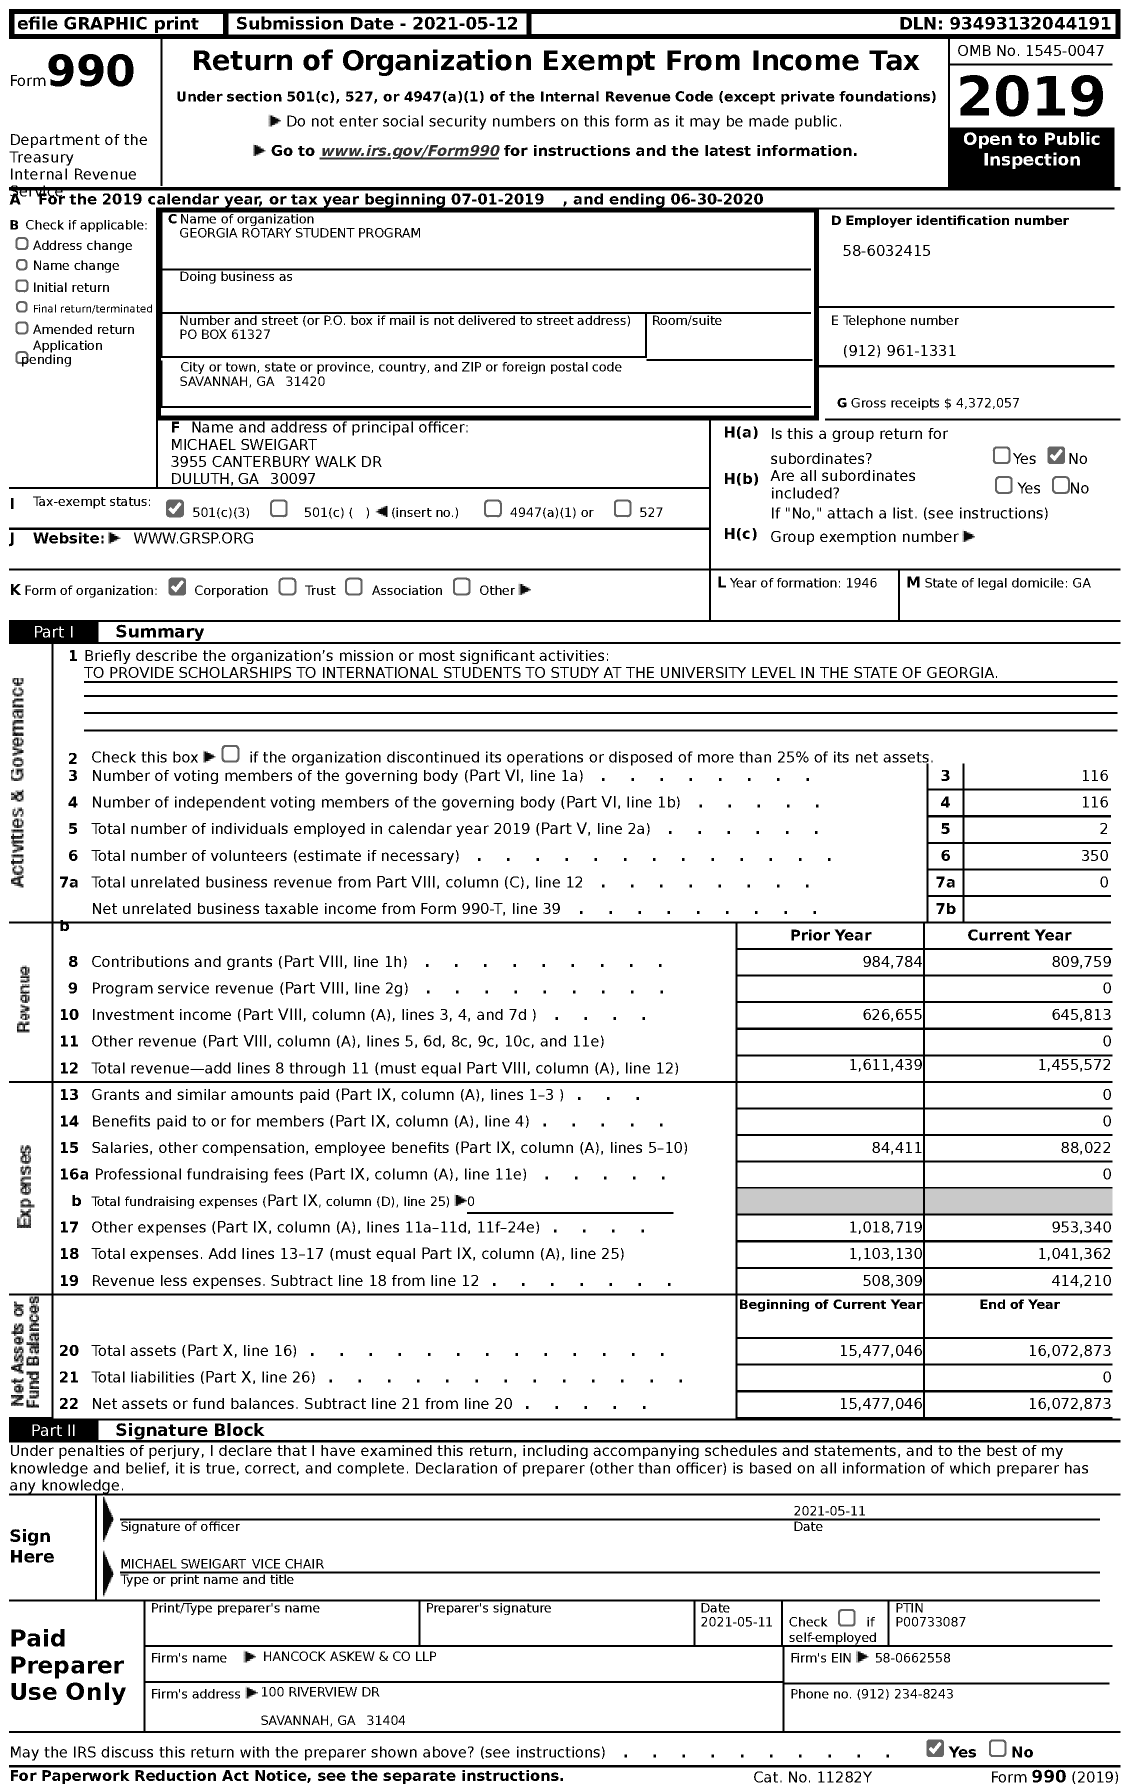 Image of first page of 2019 Form 990 for Georgia Rotary Student Program